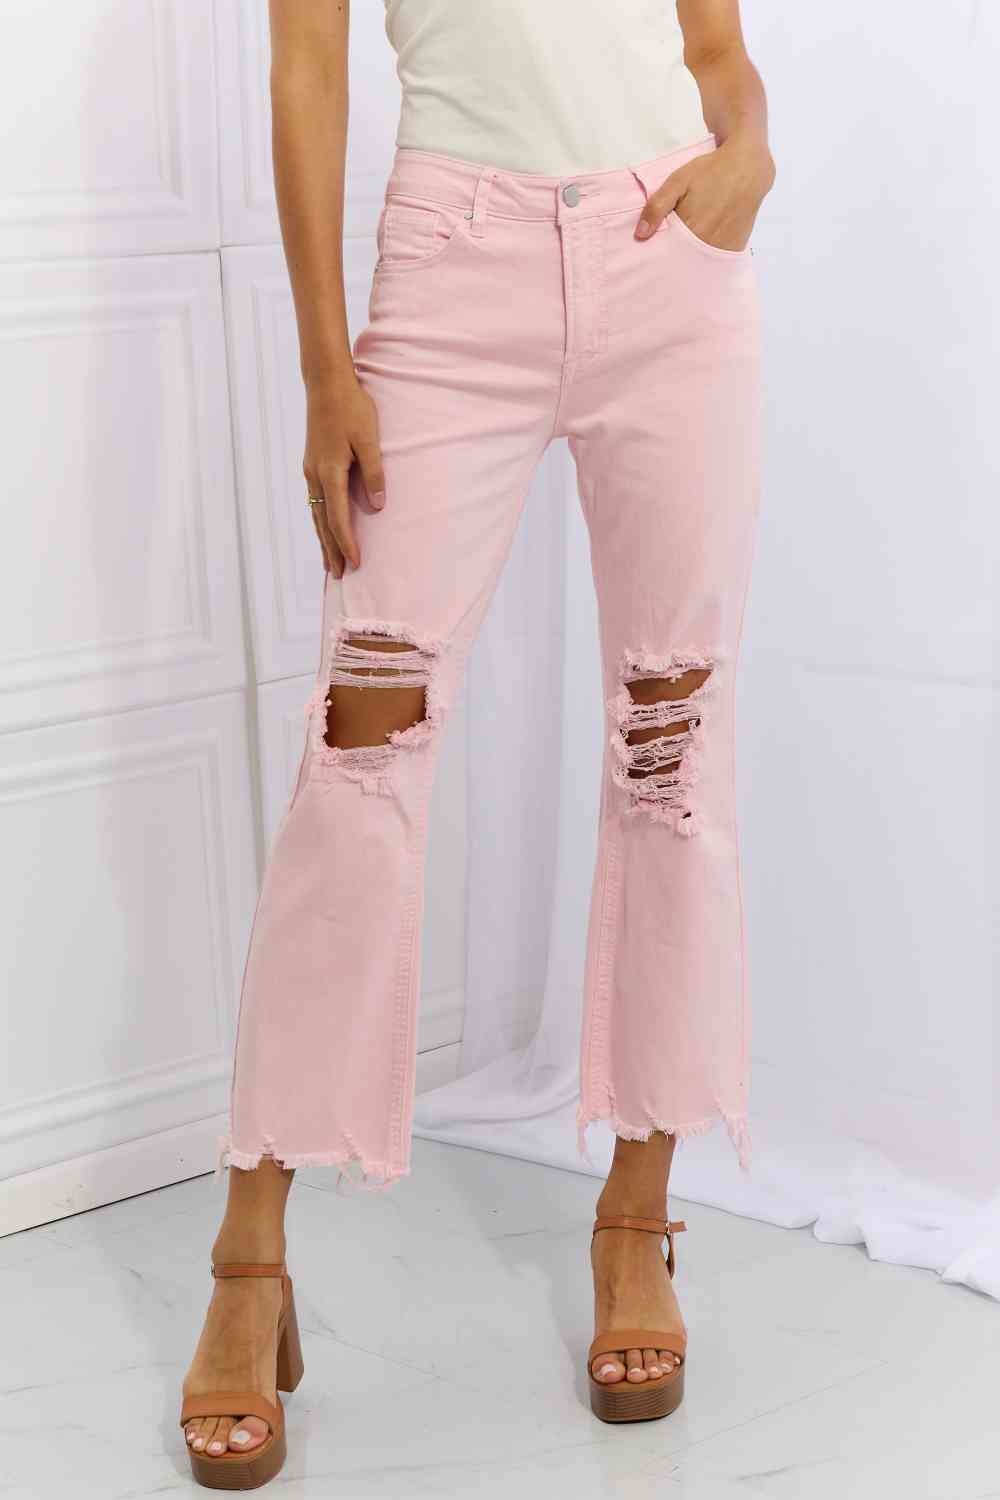 RISEN Miley Full Size Distressed Ankle Flare Jeans - Cheeky Chic Boutique